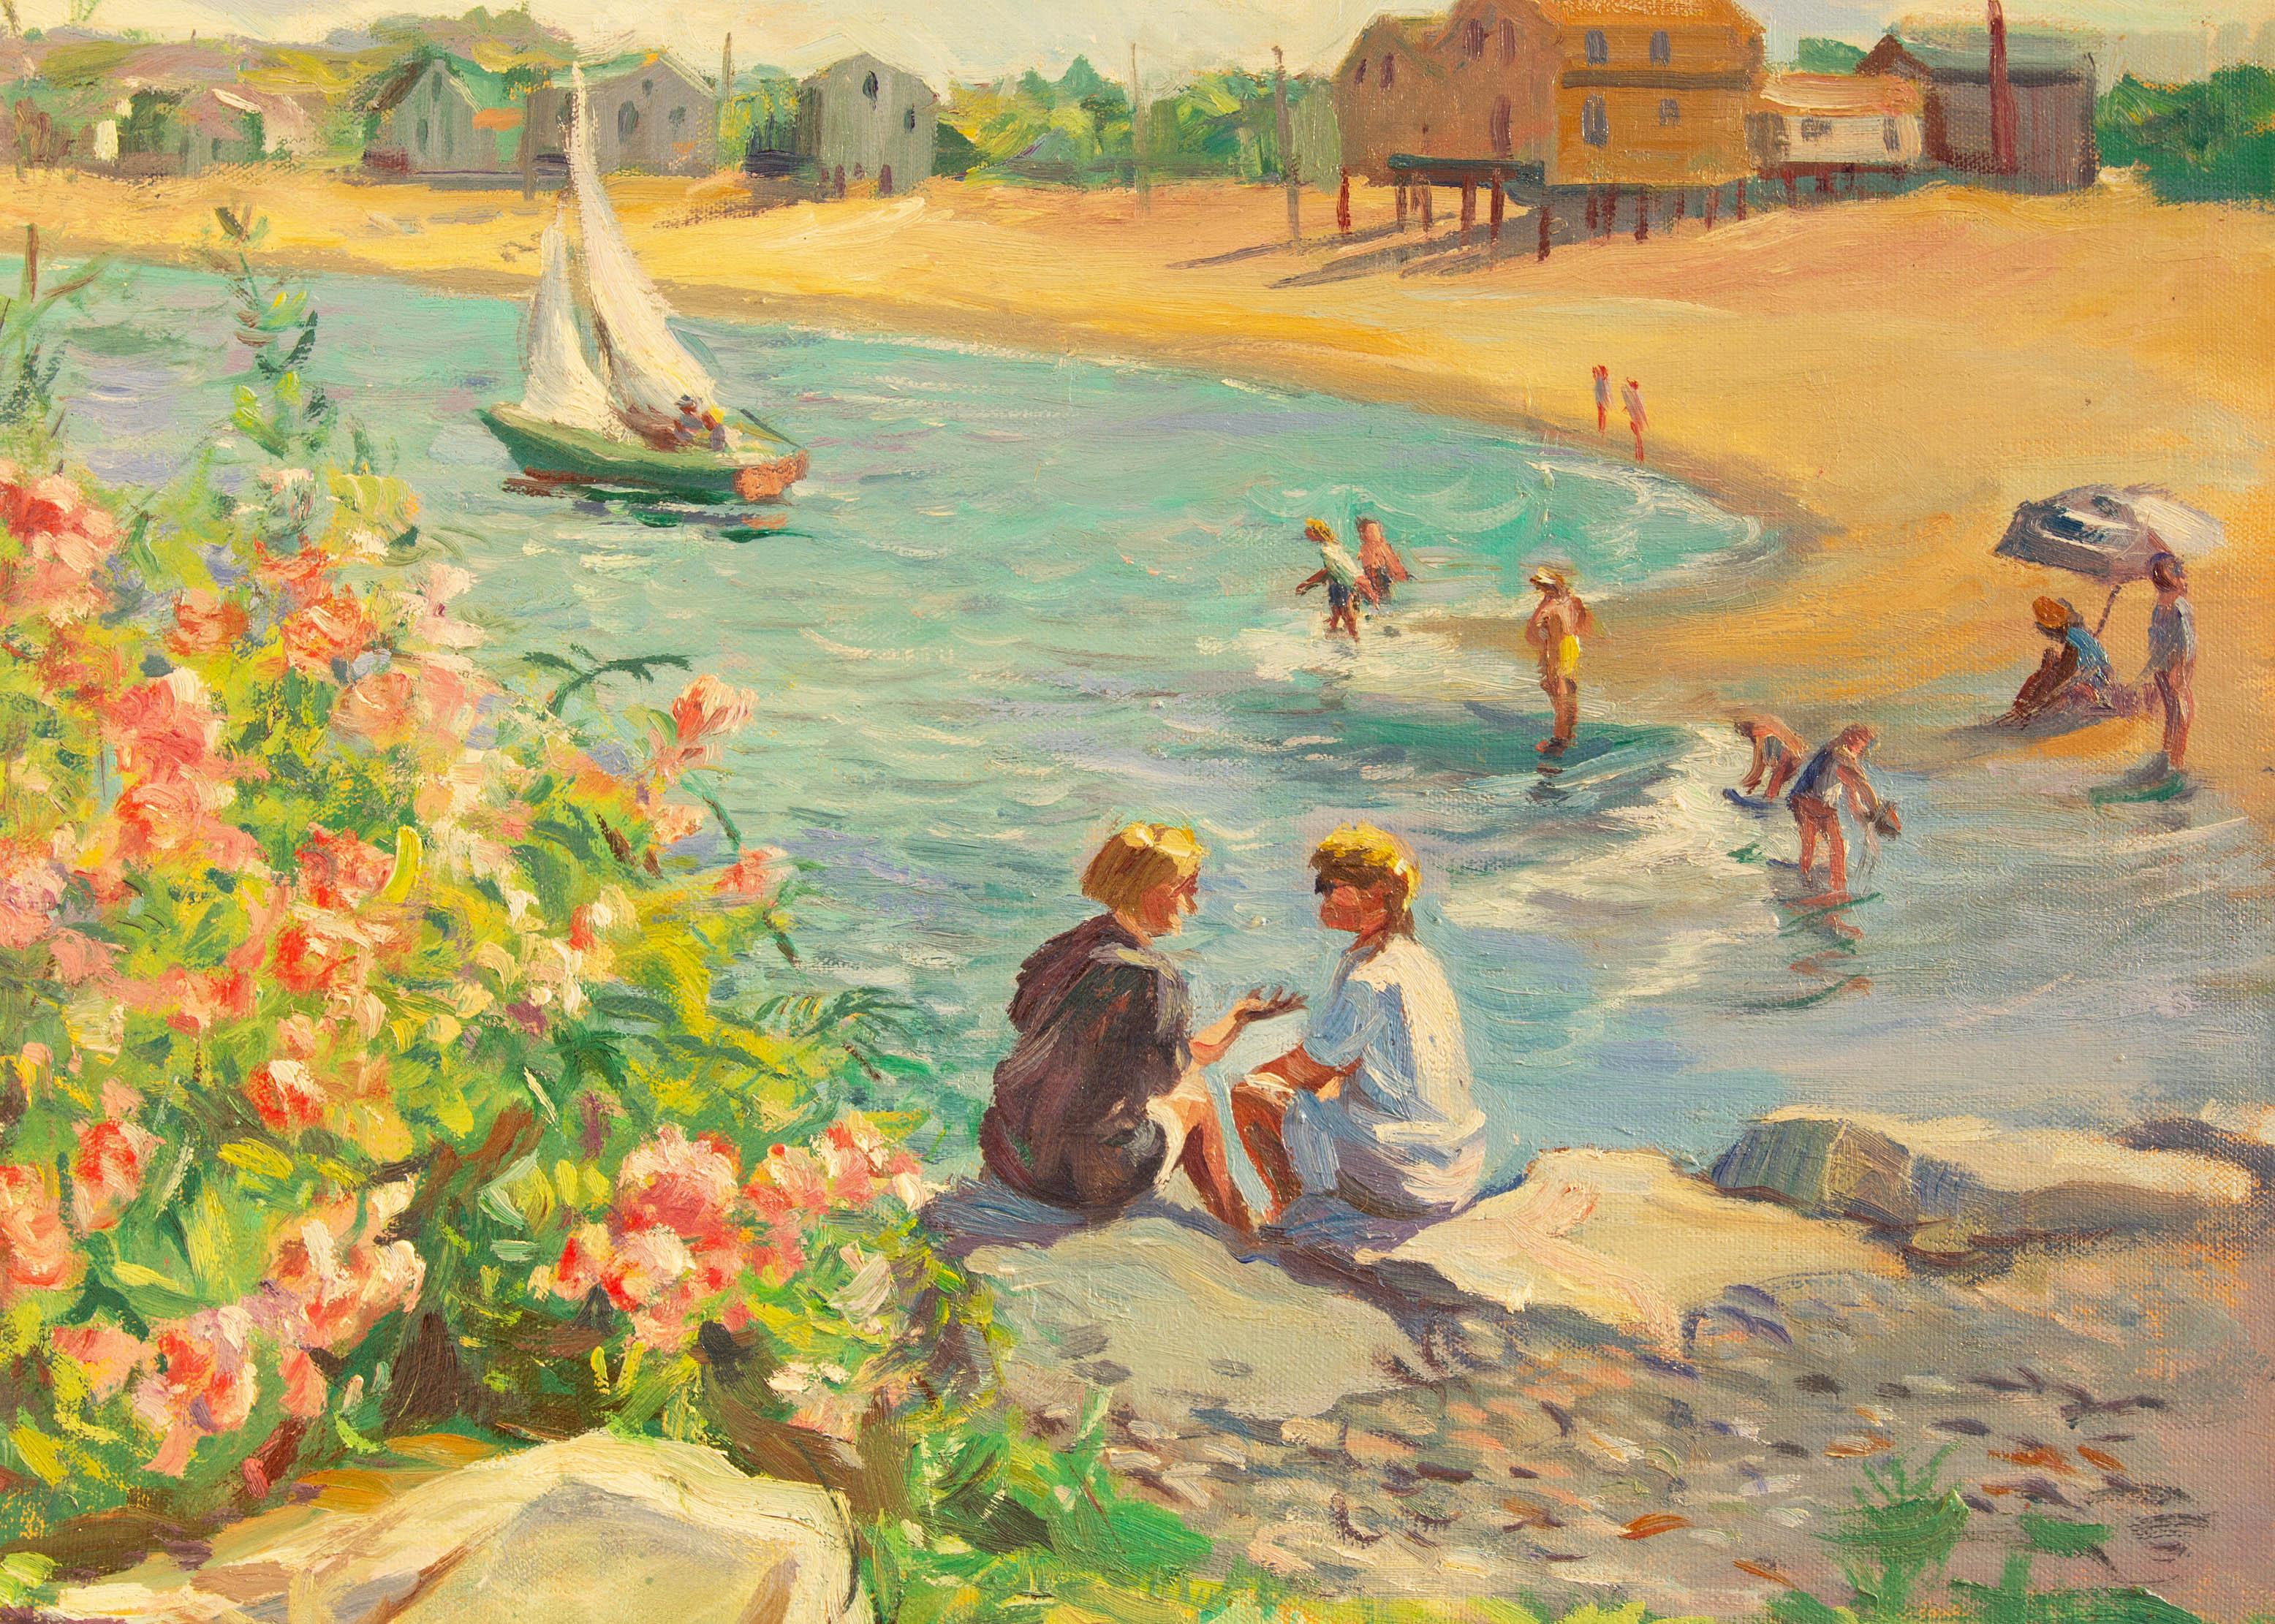 Impressionist beach scene by Marjorie Whorf. Titled 